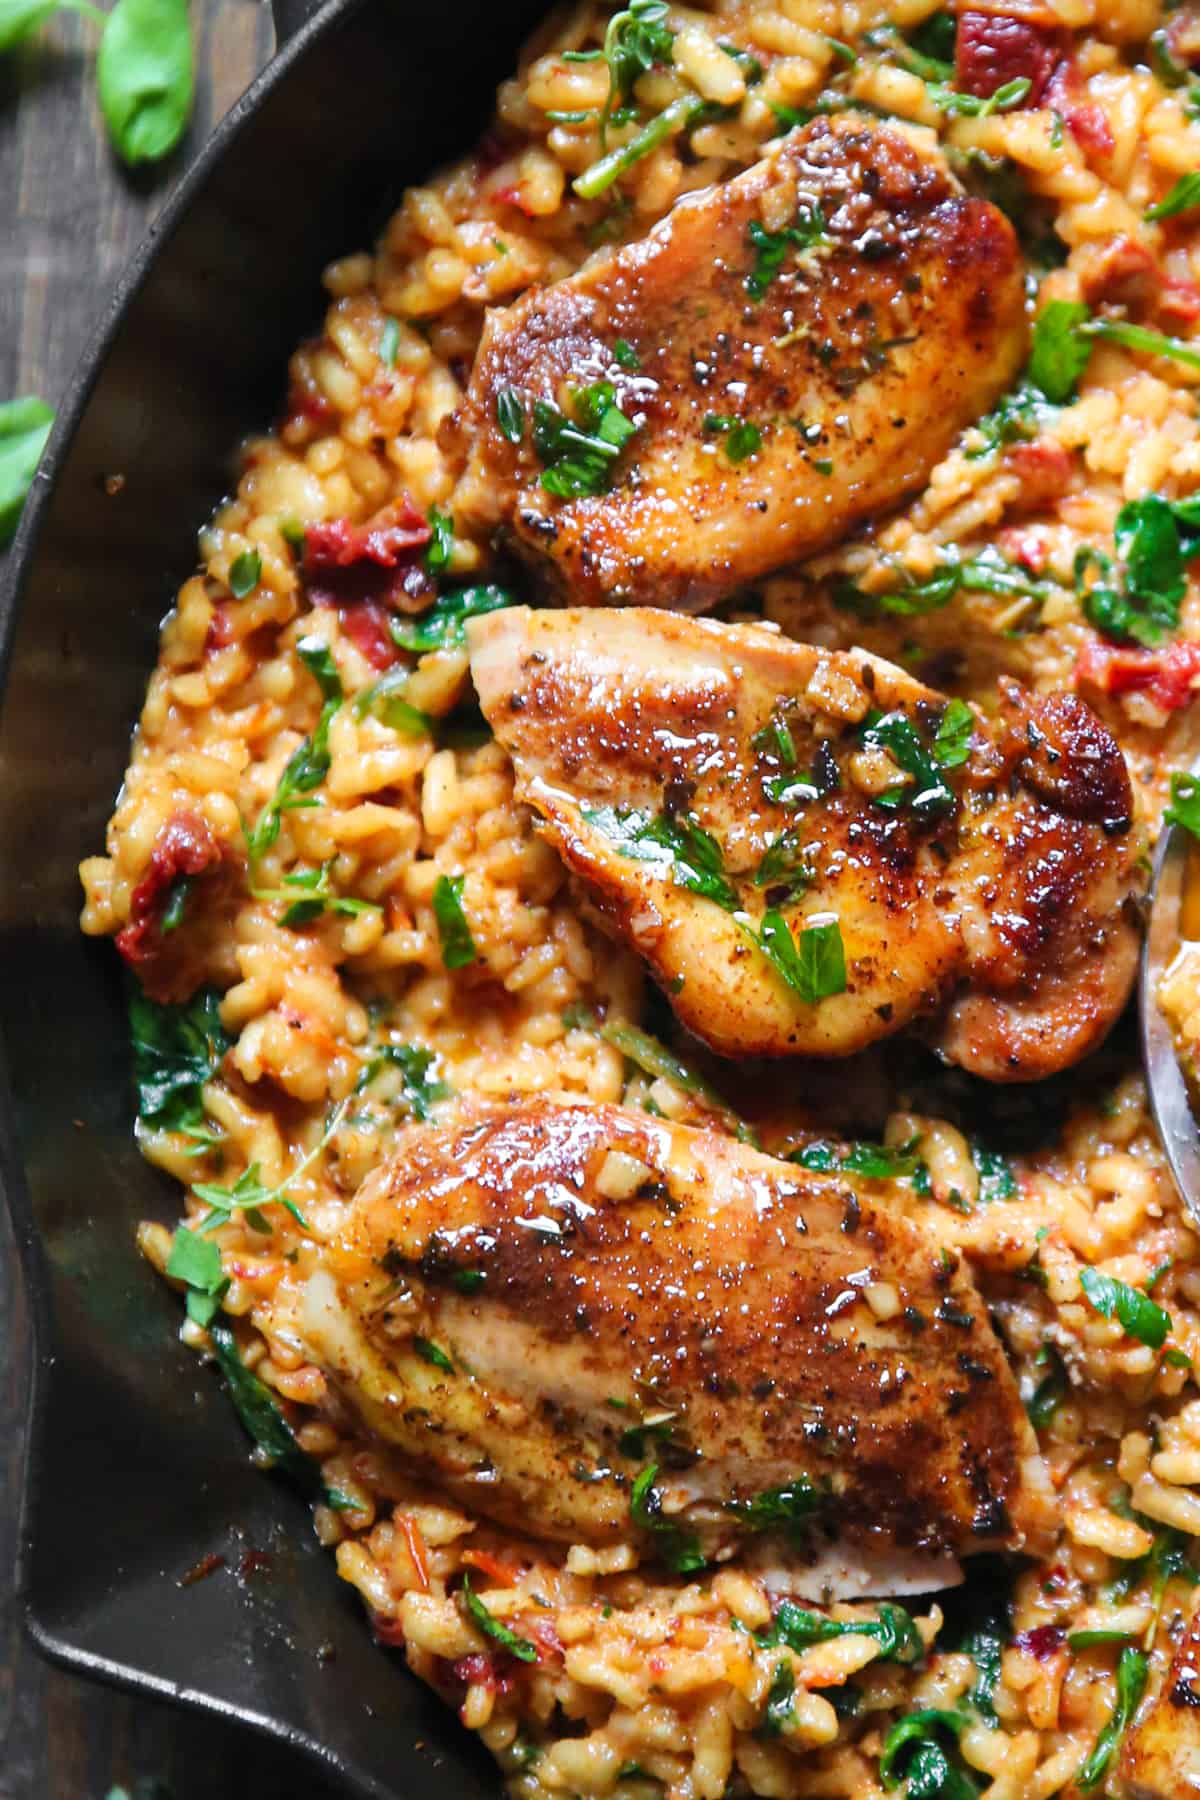 Chicken Risotto with Sun-Dried Tomatoes and Spinach in a cast iron skillet.